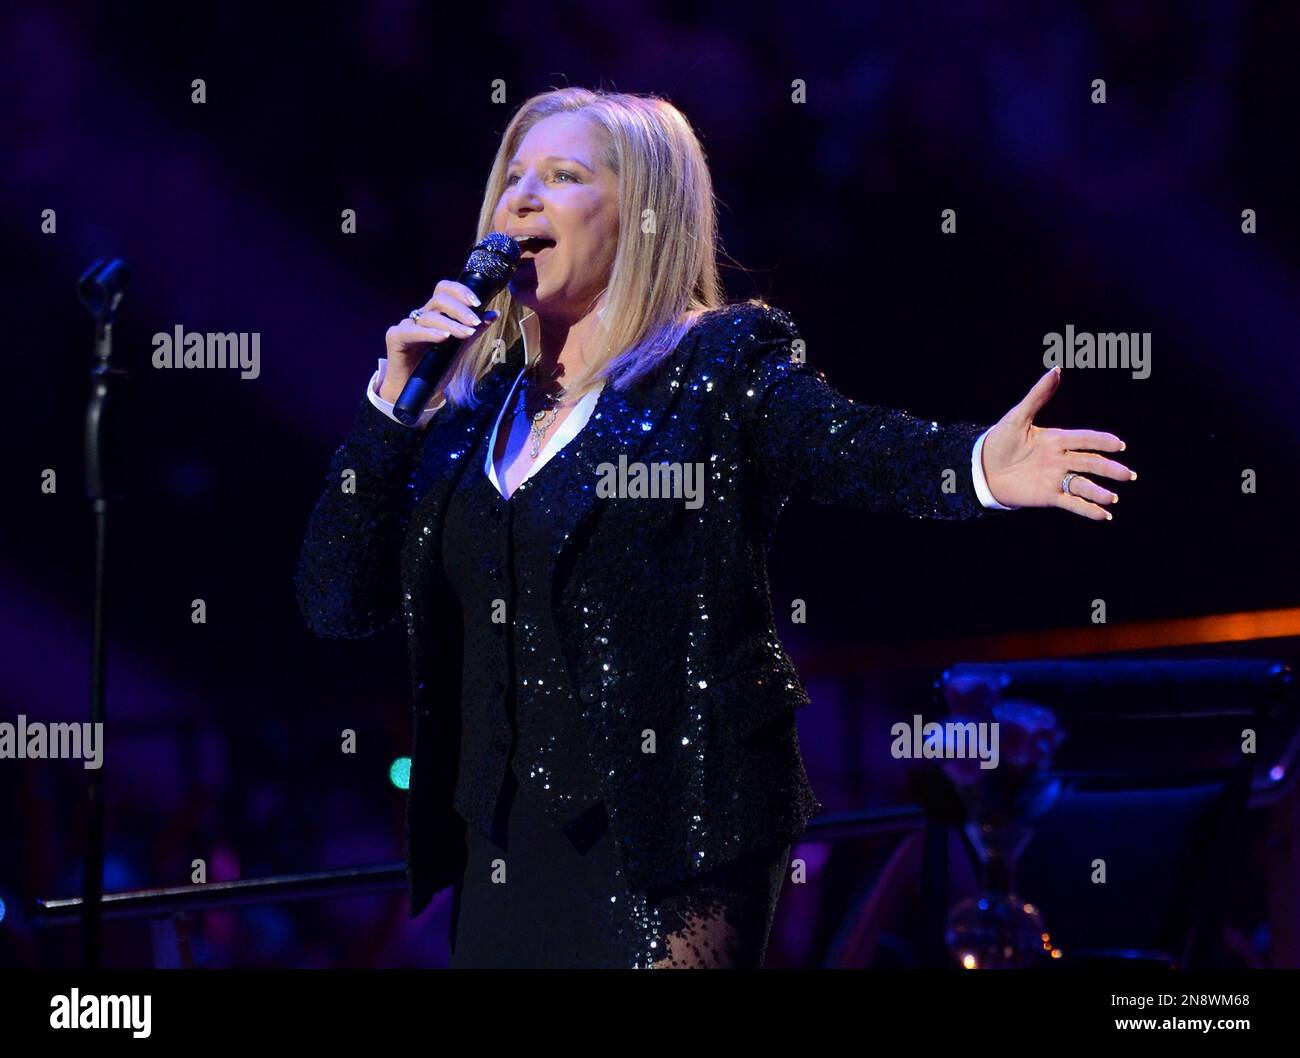 Singer Barbra Streisand kicks off her concerts at the Barclays Center in the Brooklyn borough of New York, on Thursday Oct. 11, 2012 (Photo by Evan Agostini/Invision/AP) Stock Photo